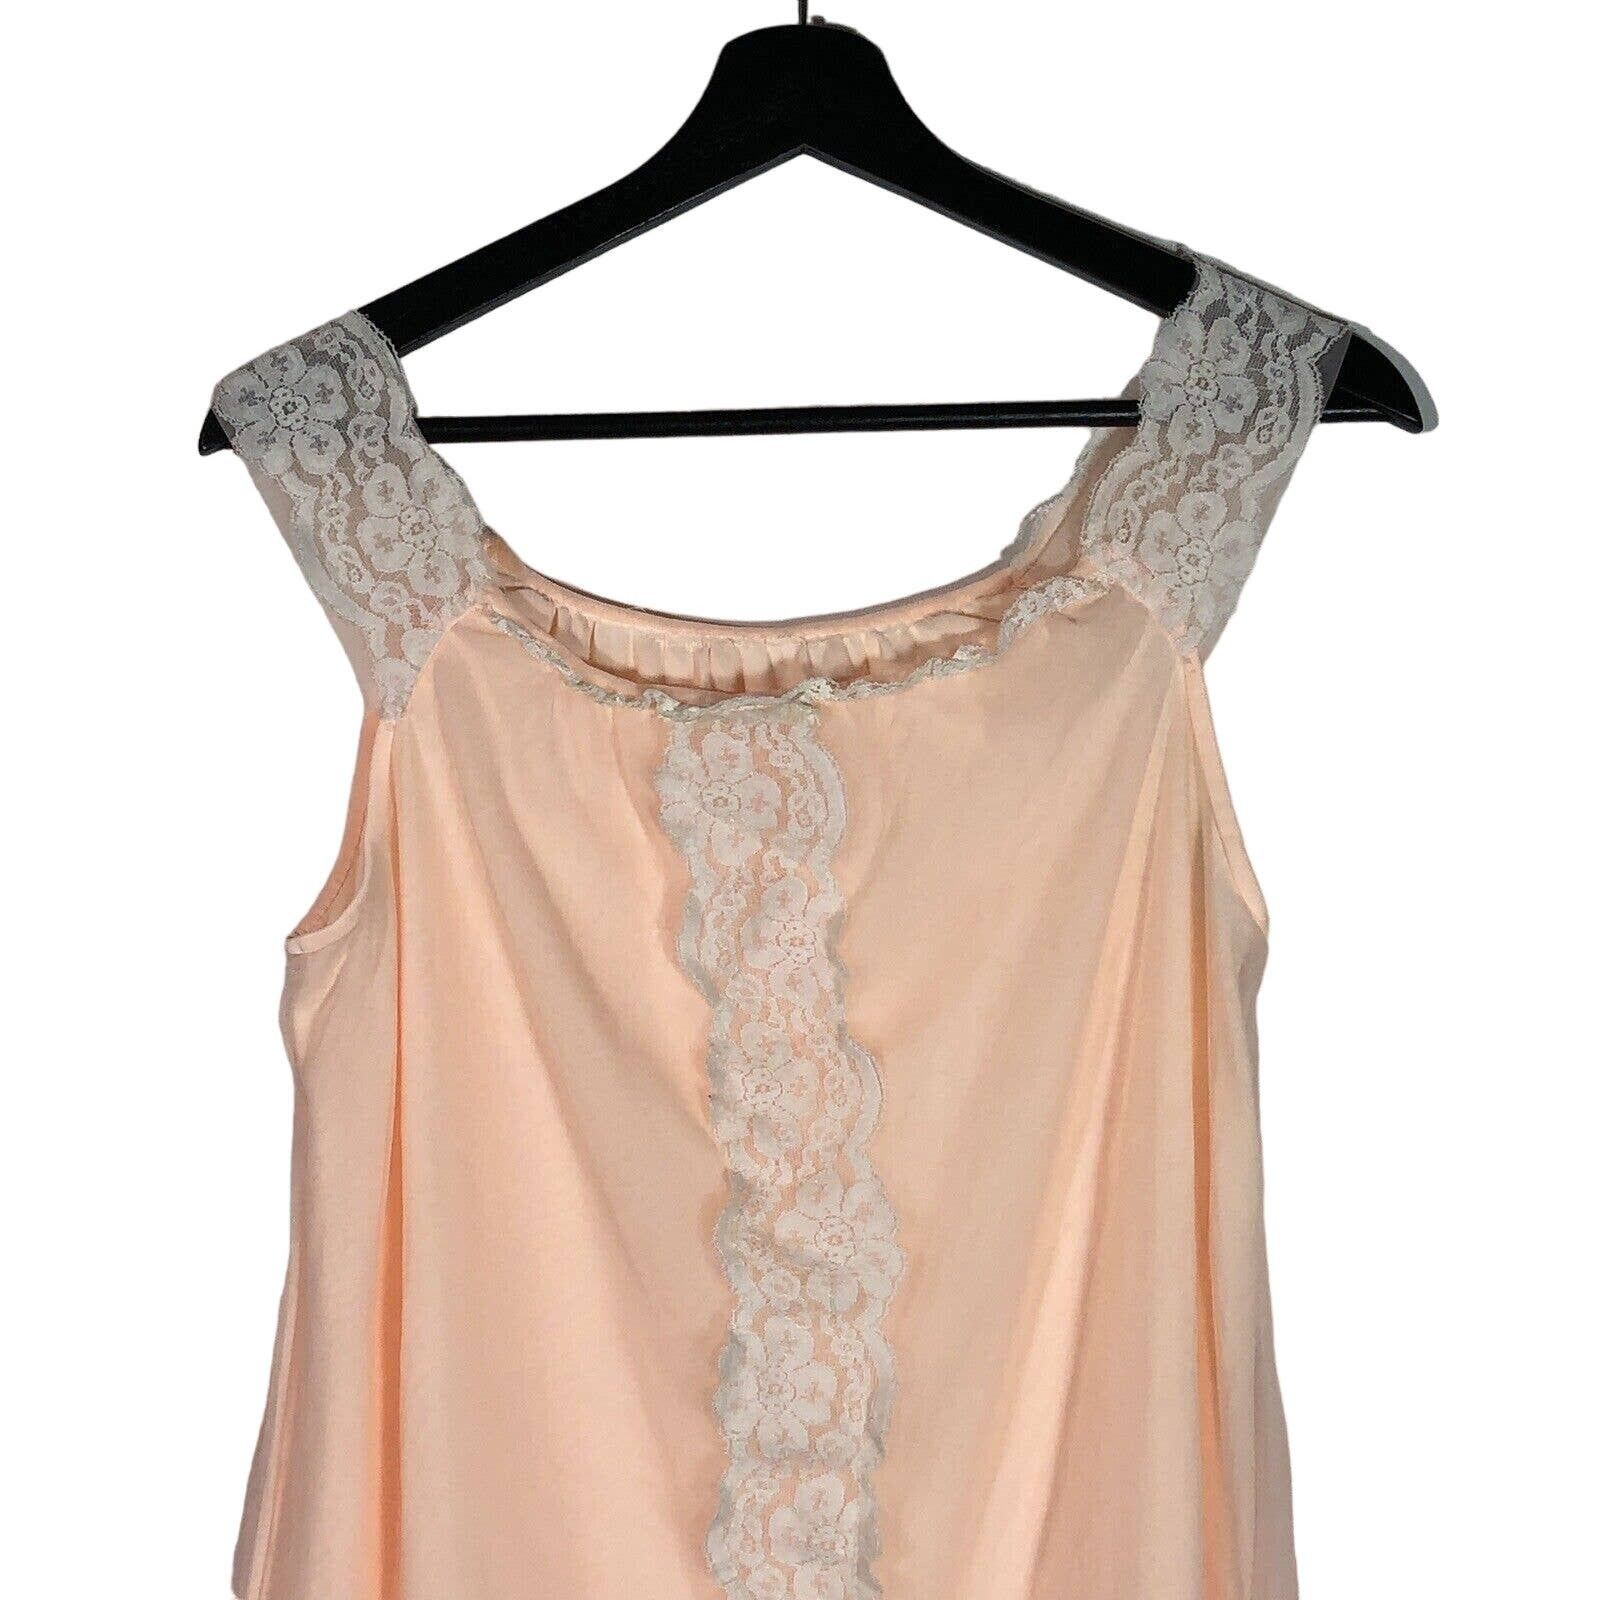 Vintage Vintage Peach and Pink Lace and Chiffon NightGown Dress S Size S / US 4 / IT 40 - 2 Preview